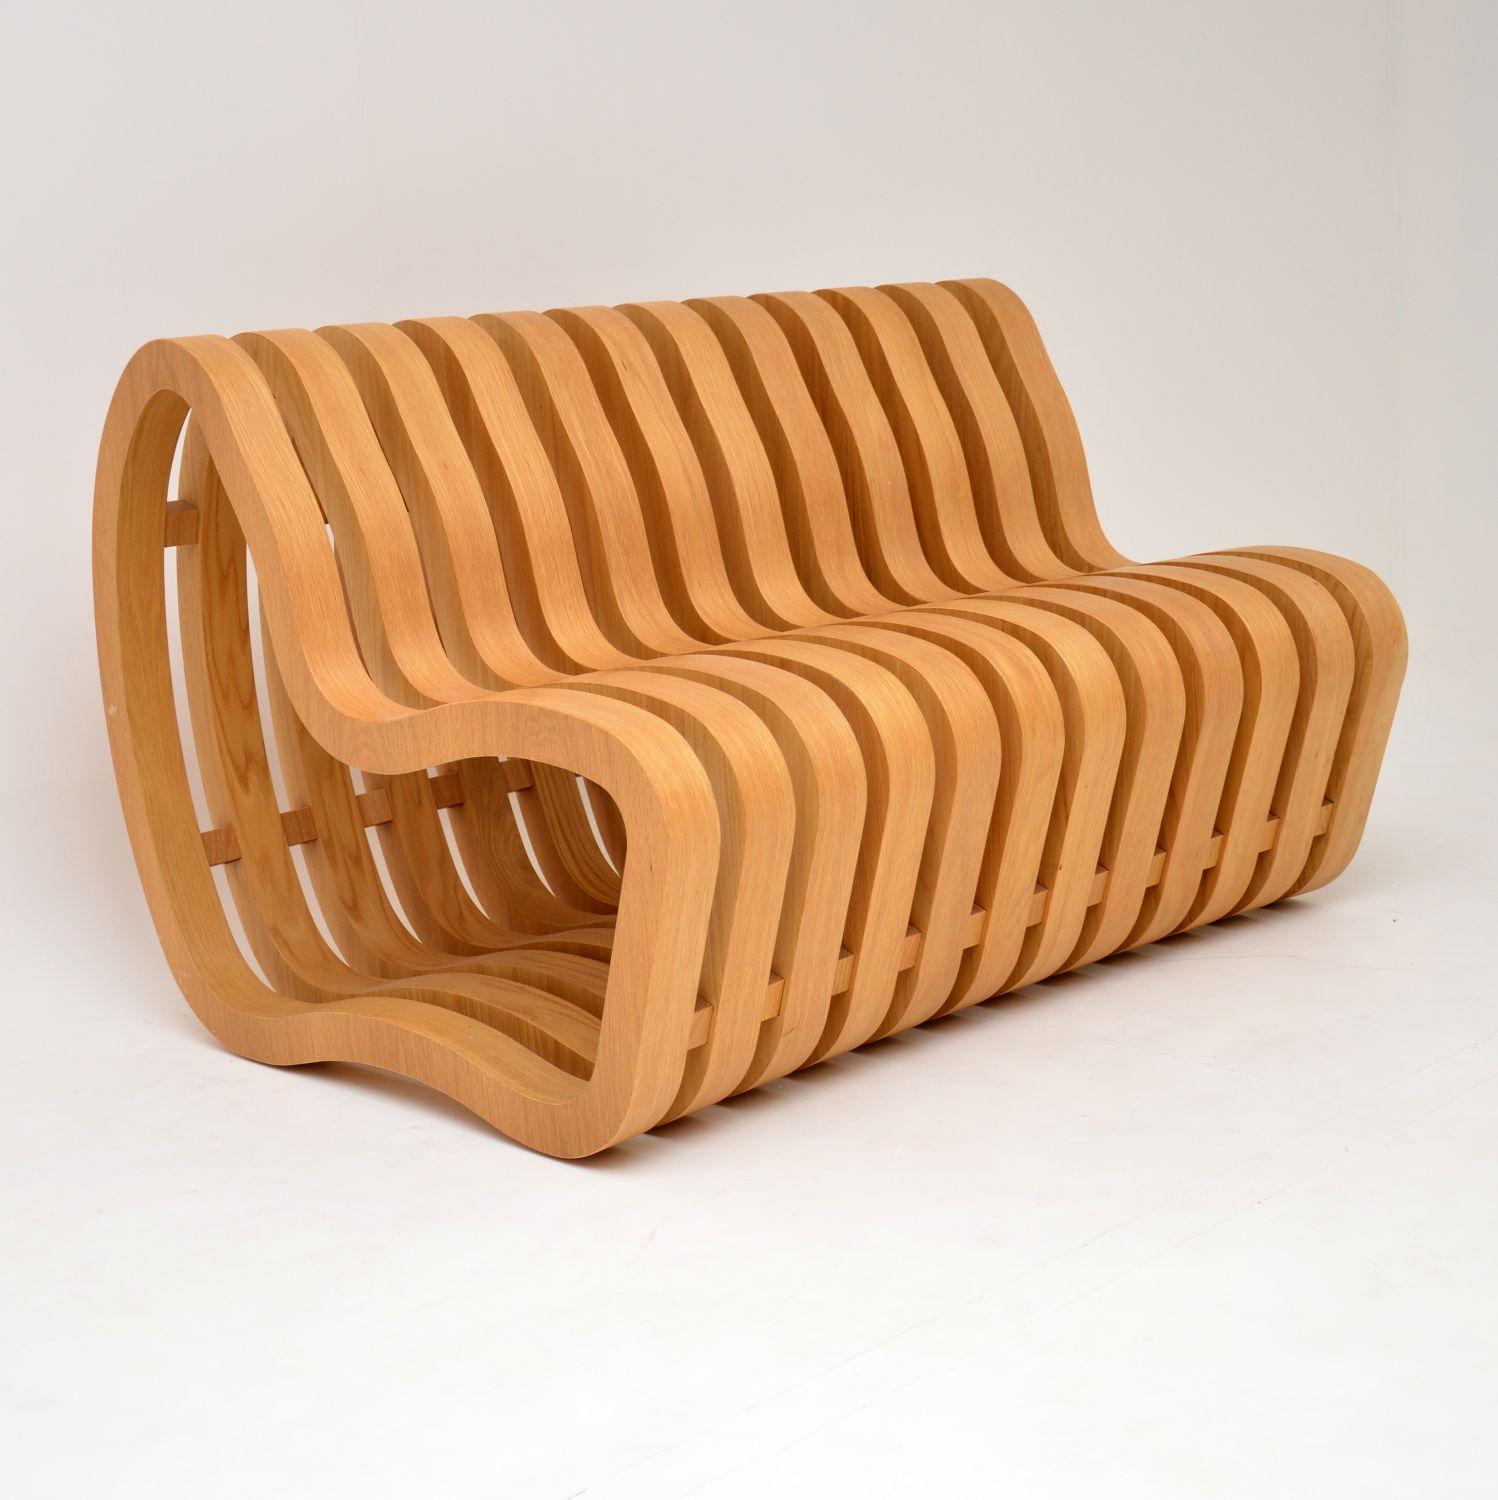 A stunning and absolutely top quality design, this is the wooden curve bench, made by Nina Moeller designs.

These are designed with a very slight curve, and can be placed next to each other to make even longer continuous benches. They are